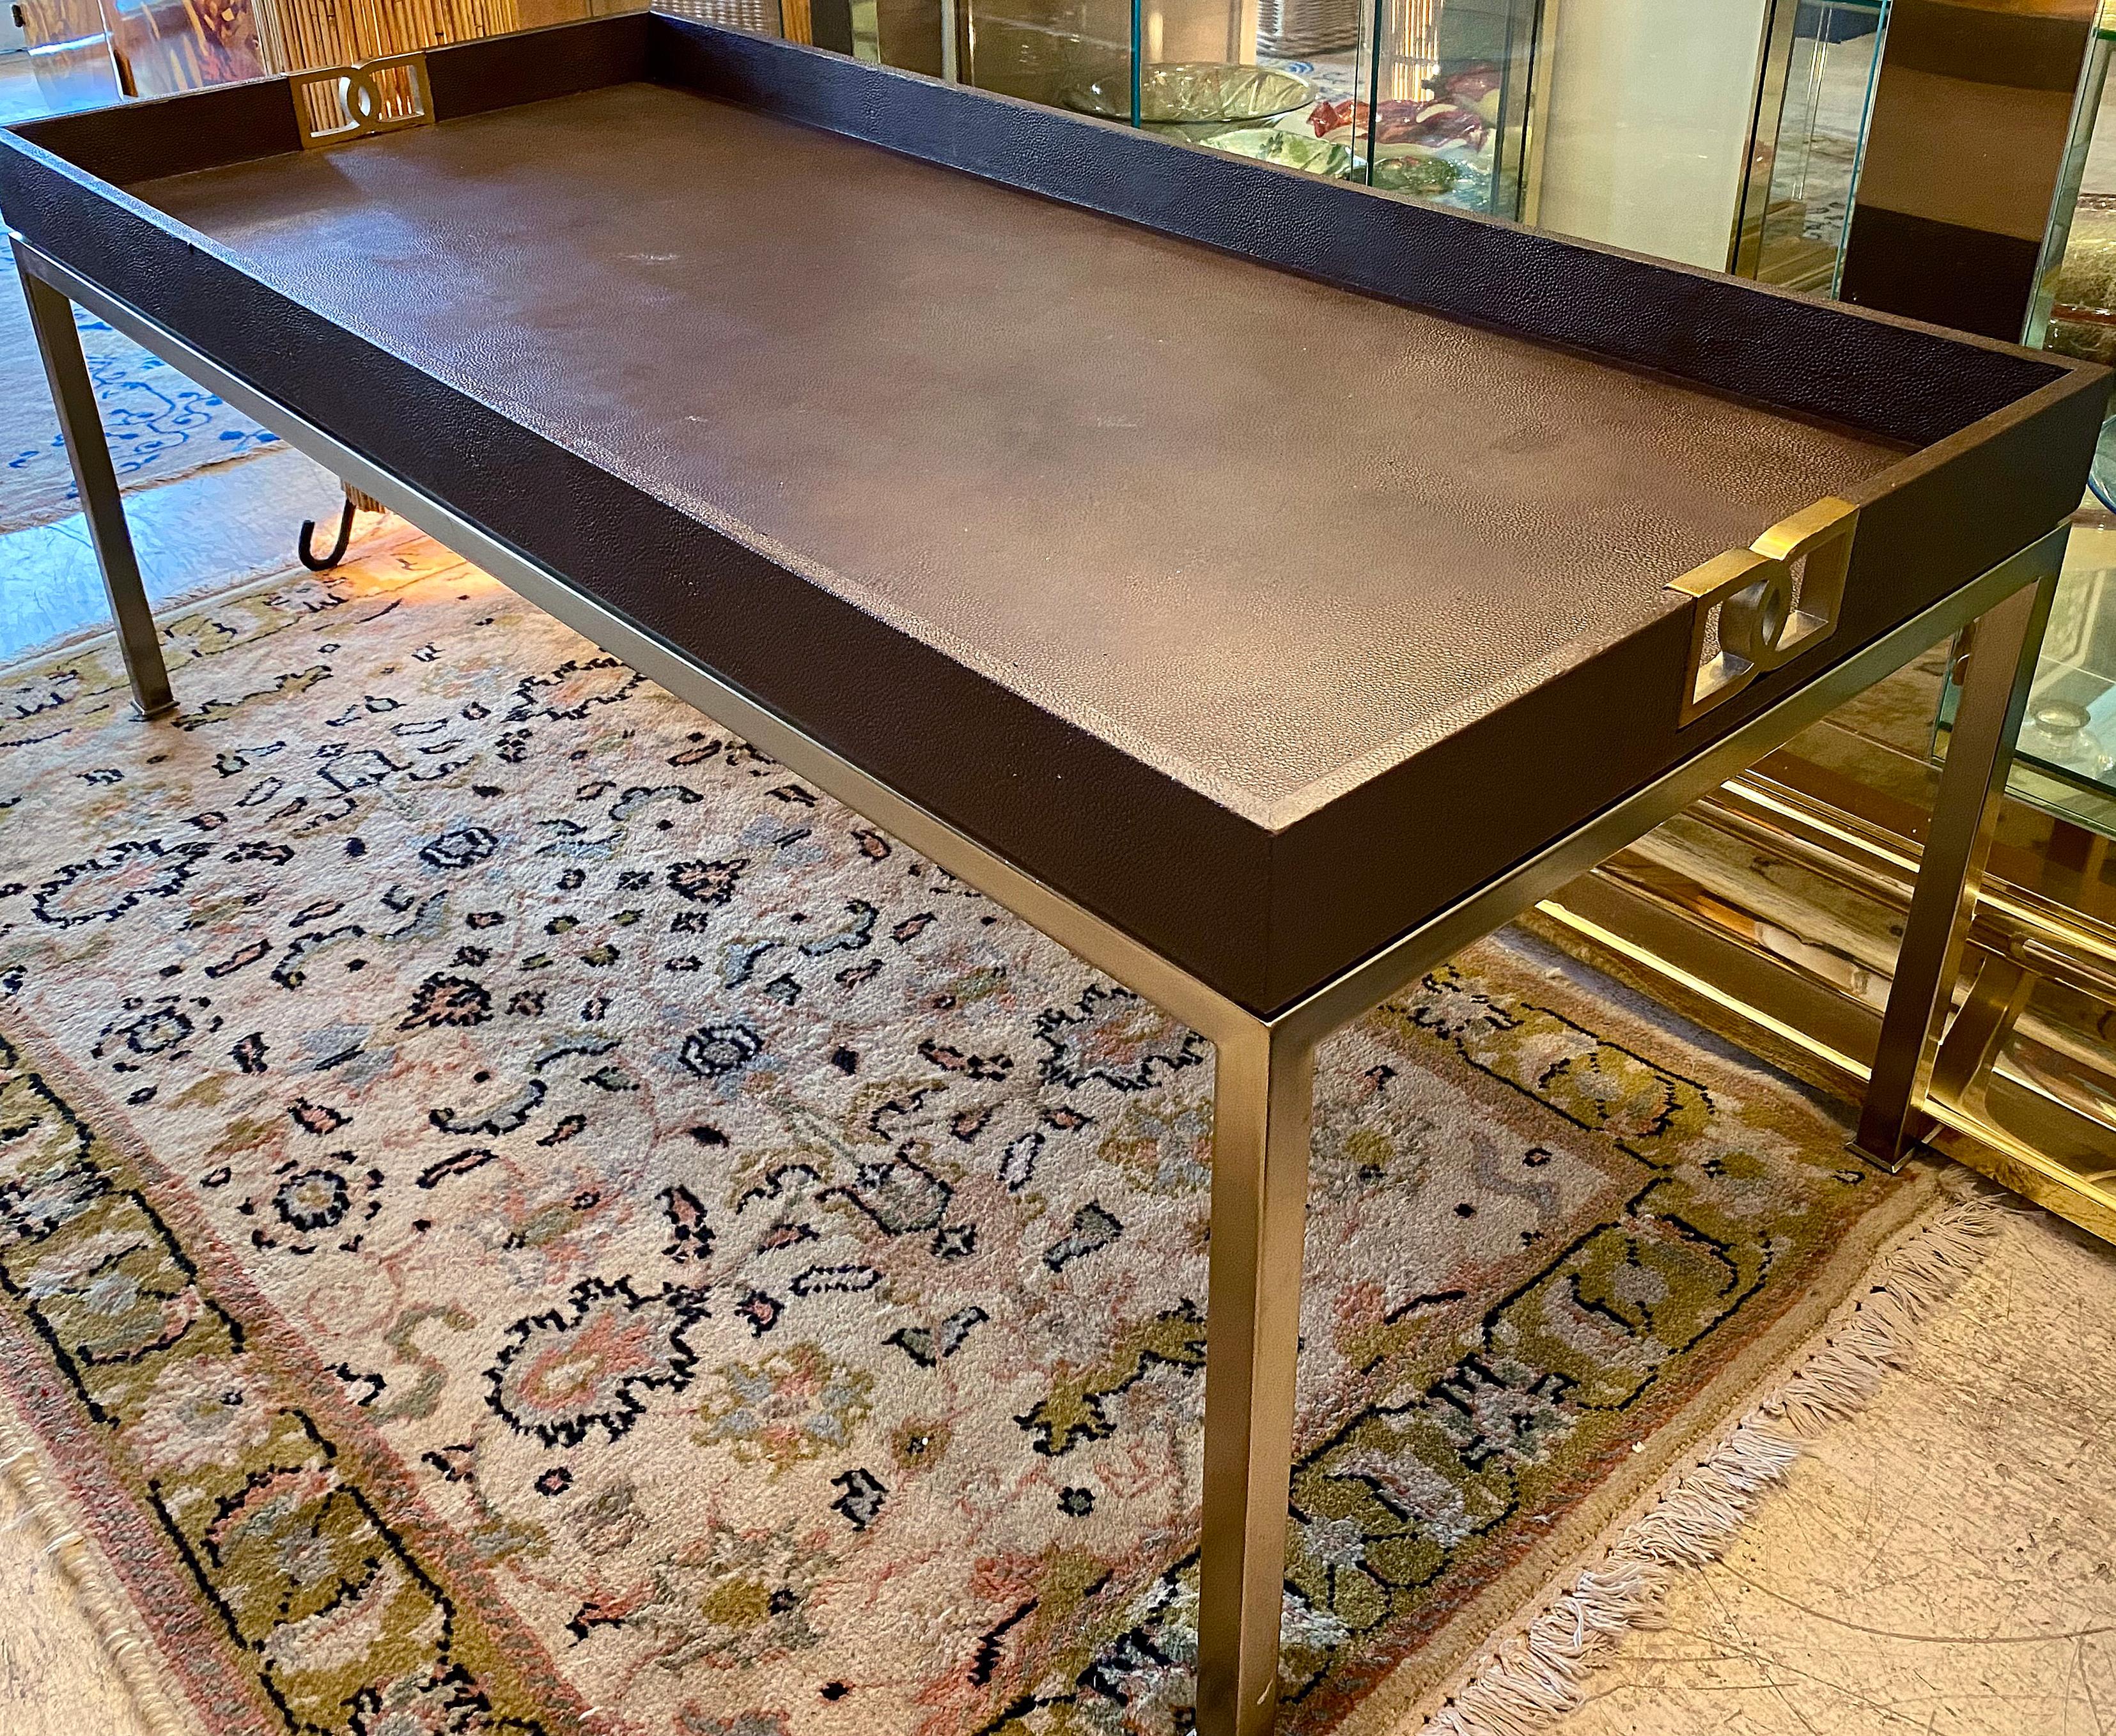 Offered for sale is an elegant Bernhardt faux shagreen and brass coffee table. The table has decorative cut-out handles at either end and a faux shagreen leather top which has the look of a tray top. The recessed space offers a rail to keep items